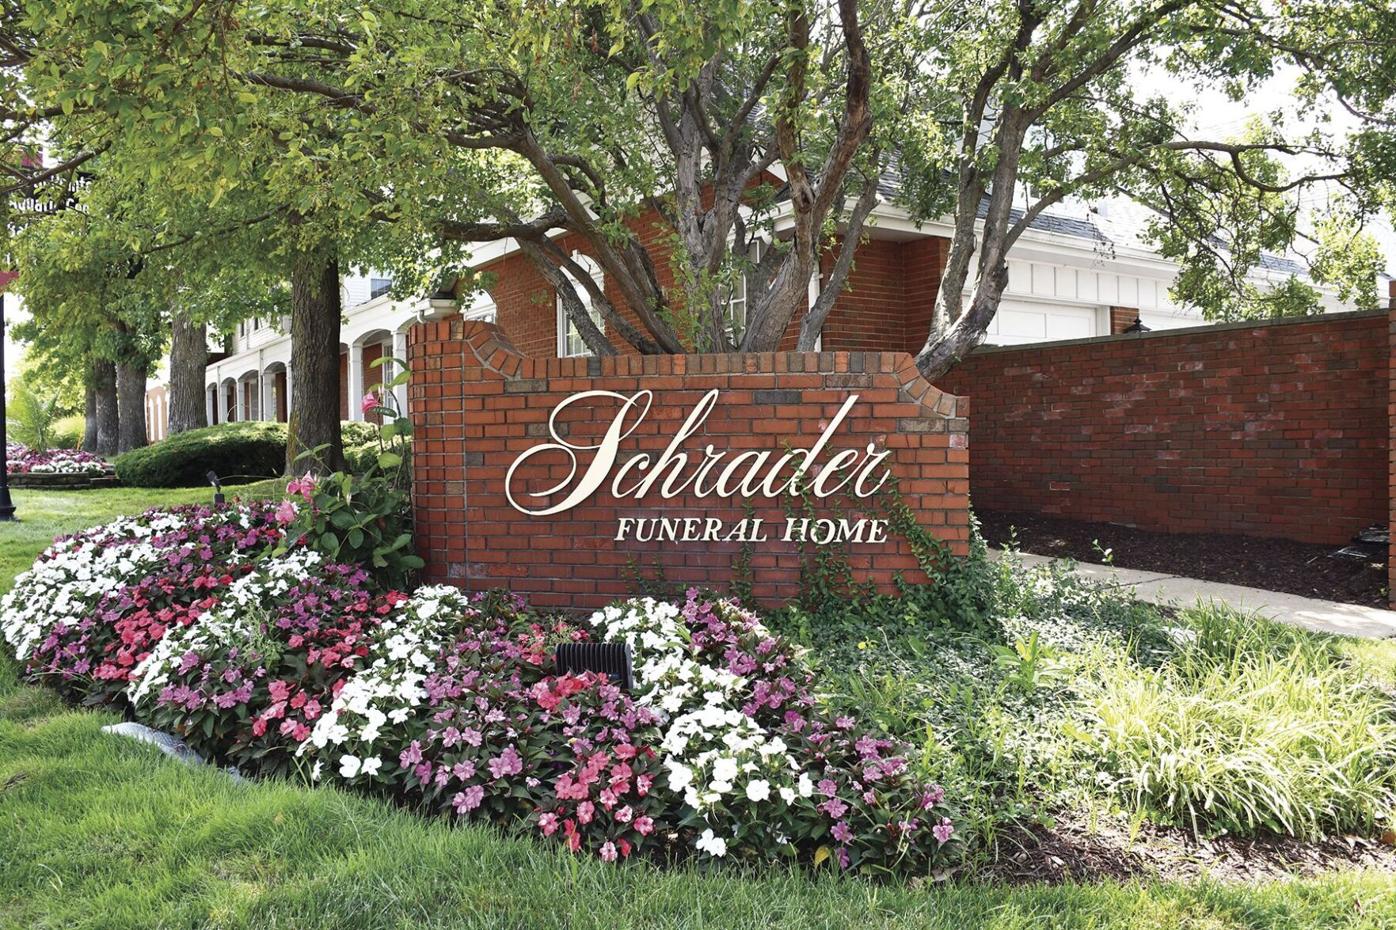 Trusted service, neighbor to neighbor, from Schrader Funeral Home |  Business 